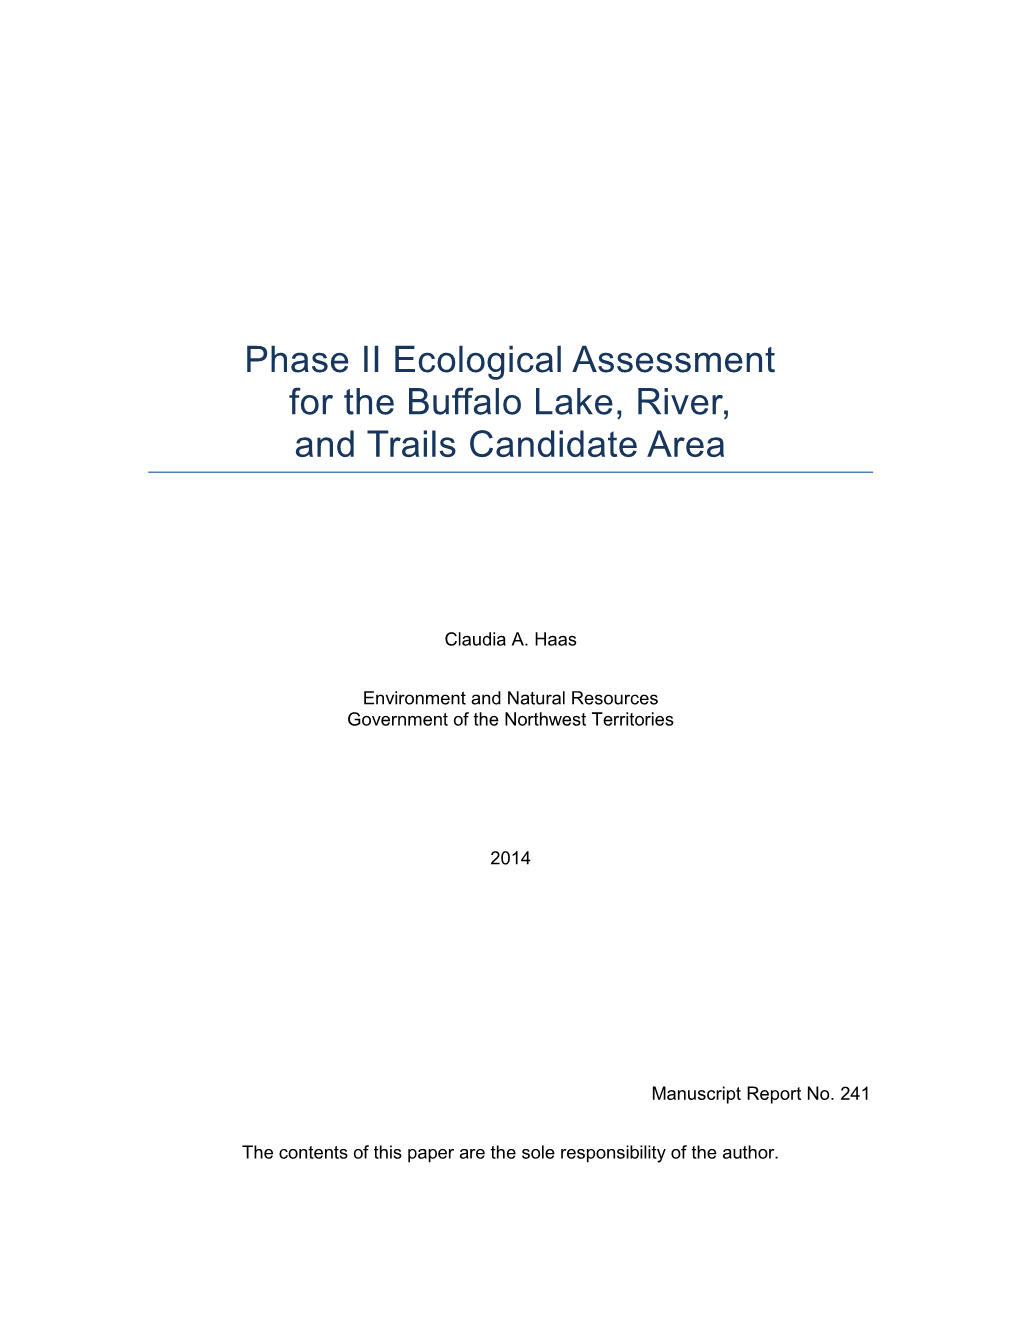 Phase II Ecological Assessment for the Buffalo Lake, River, and Trails Candidate Area